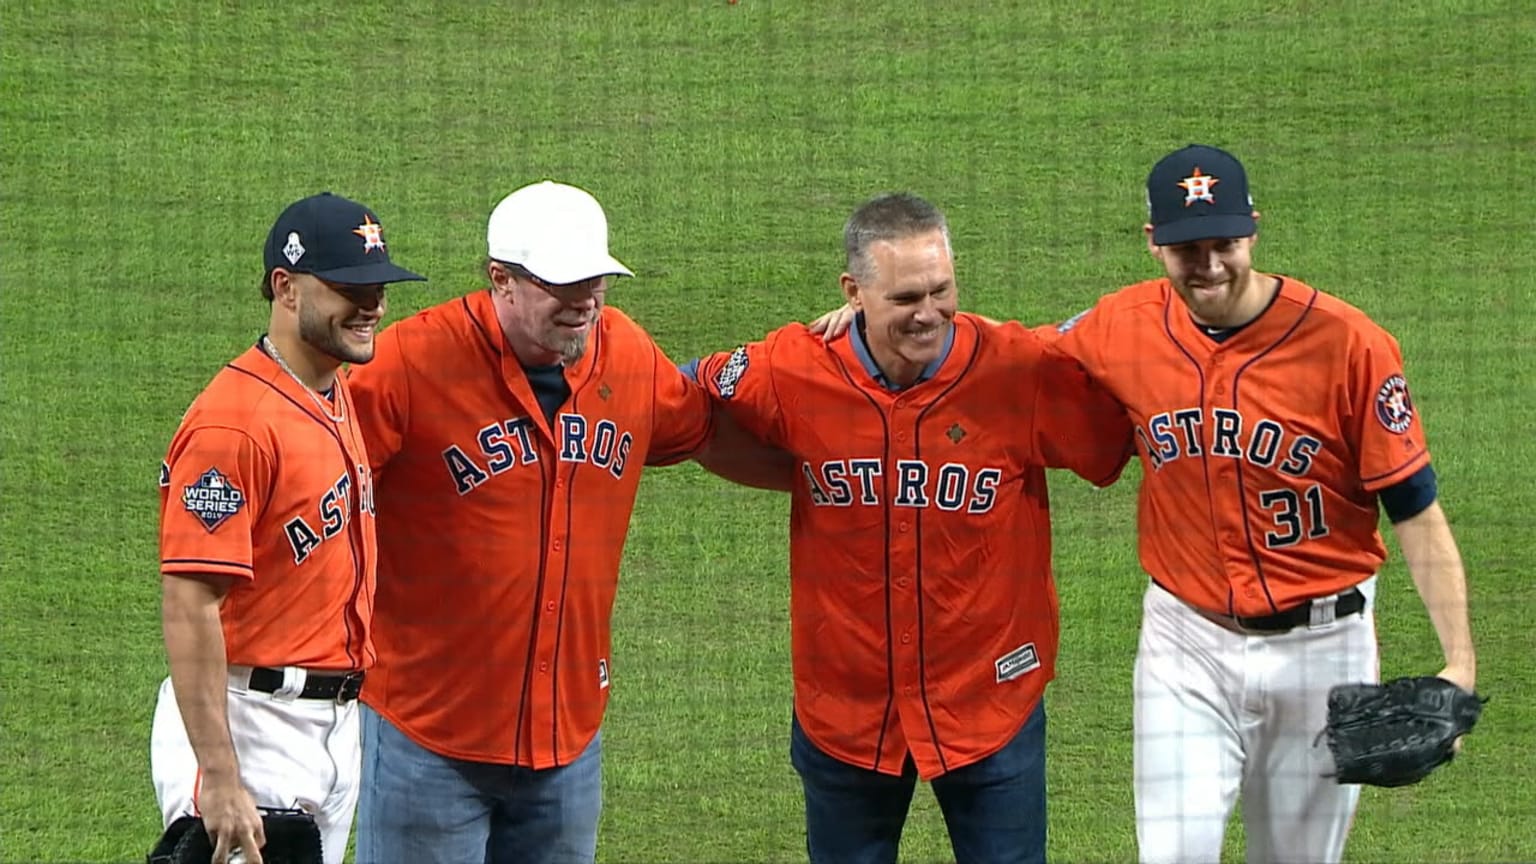 Craig Biggio and Jeff Bagwell through out first pitch of Game 7